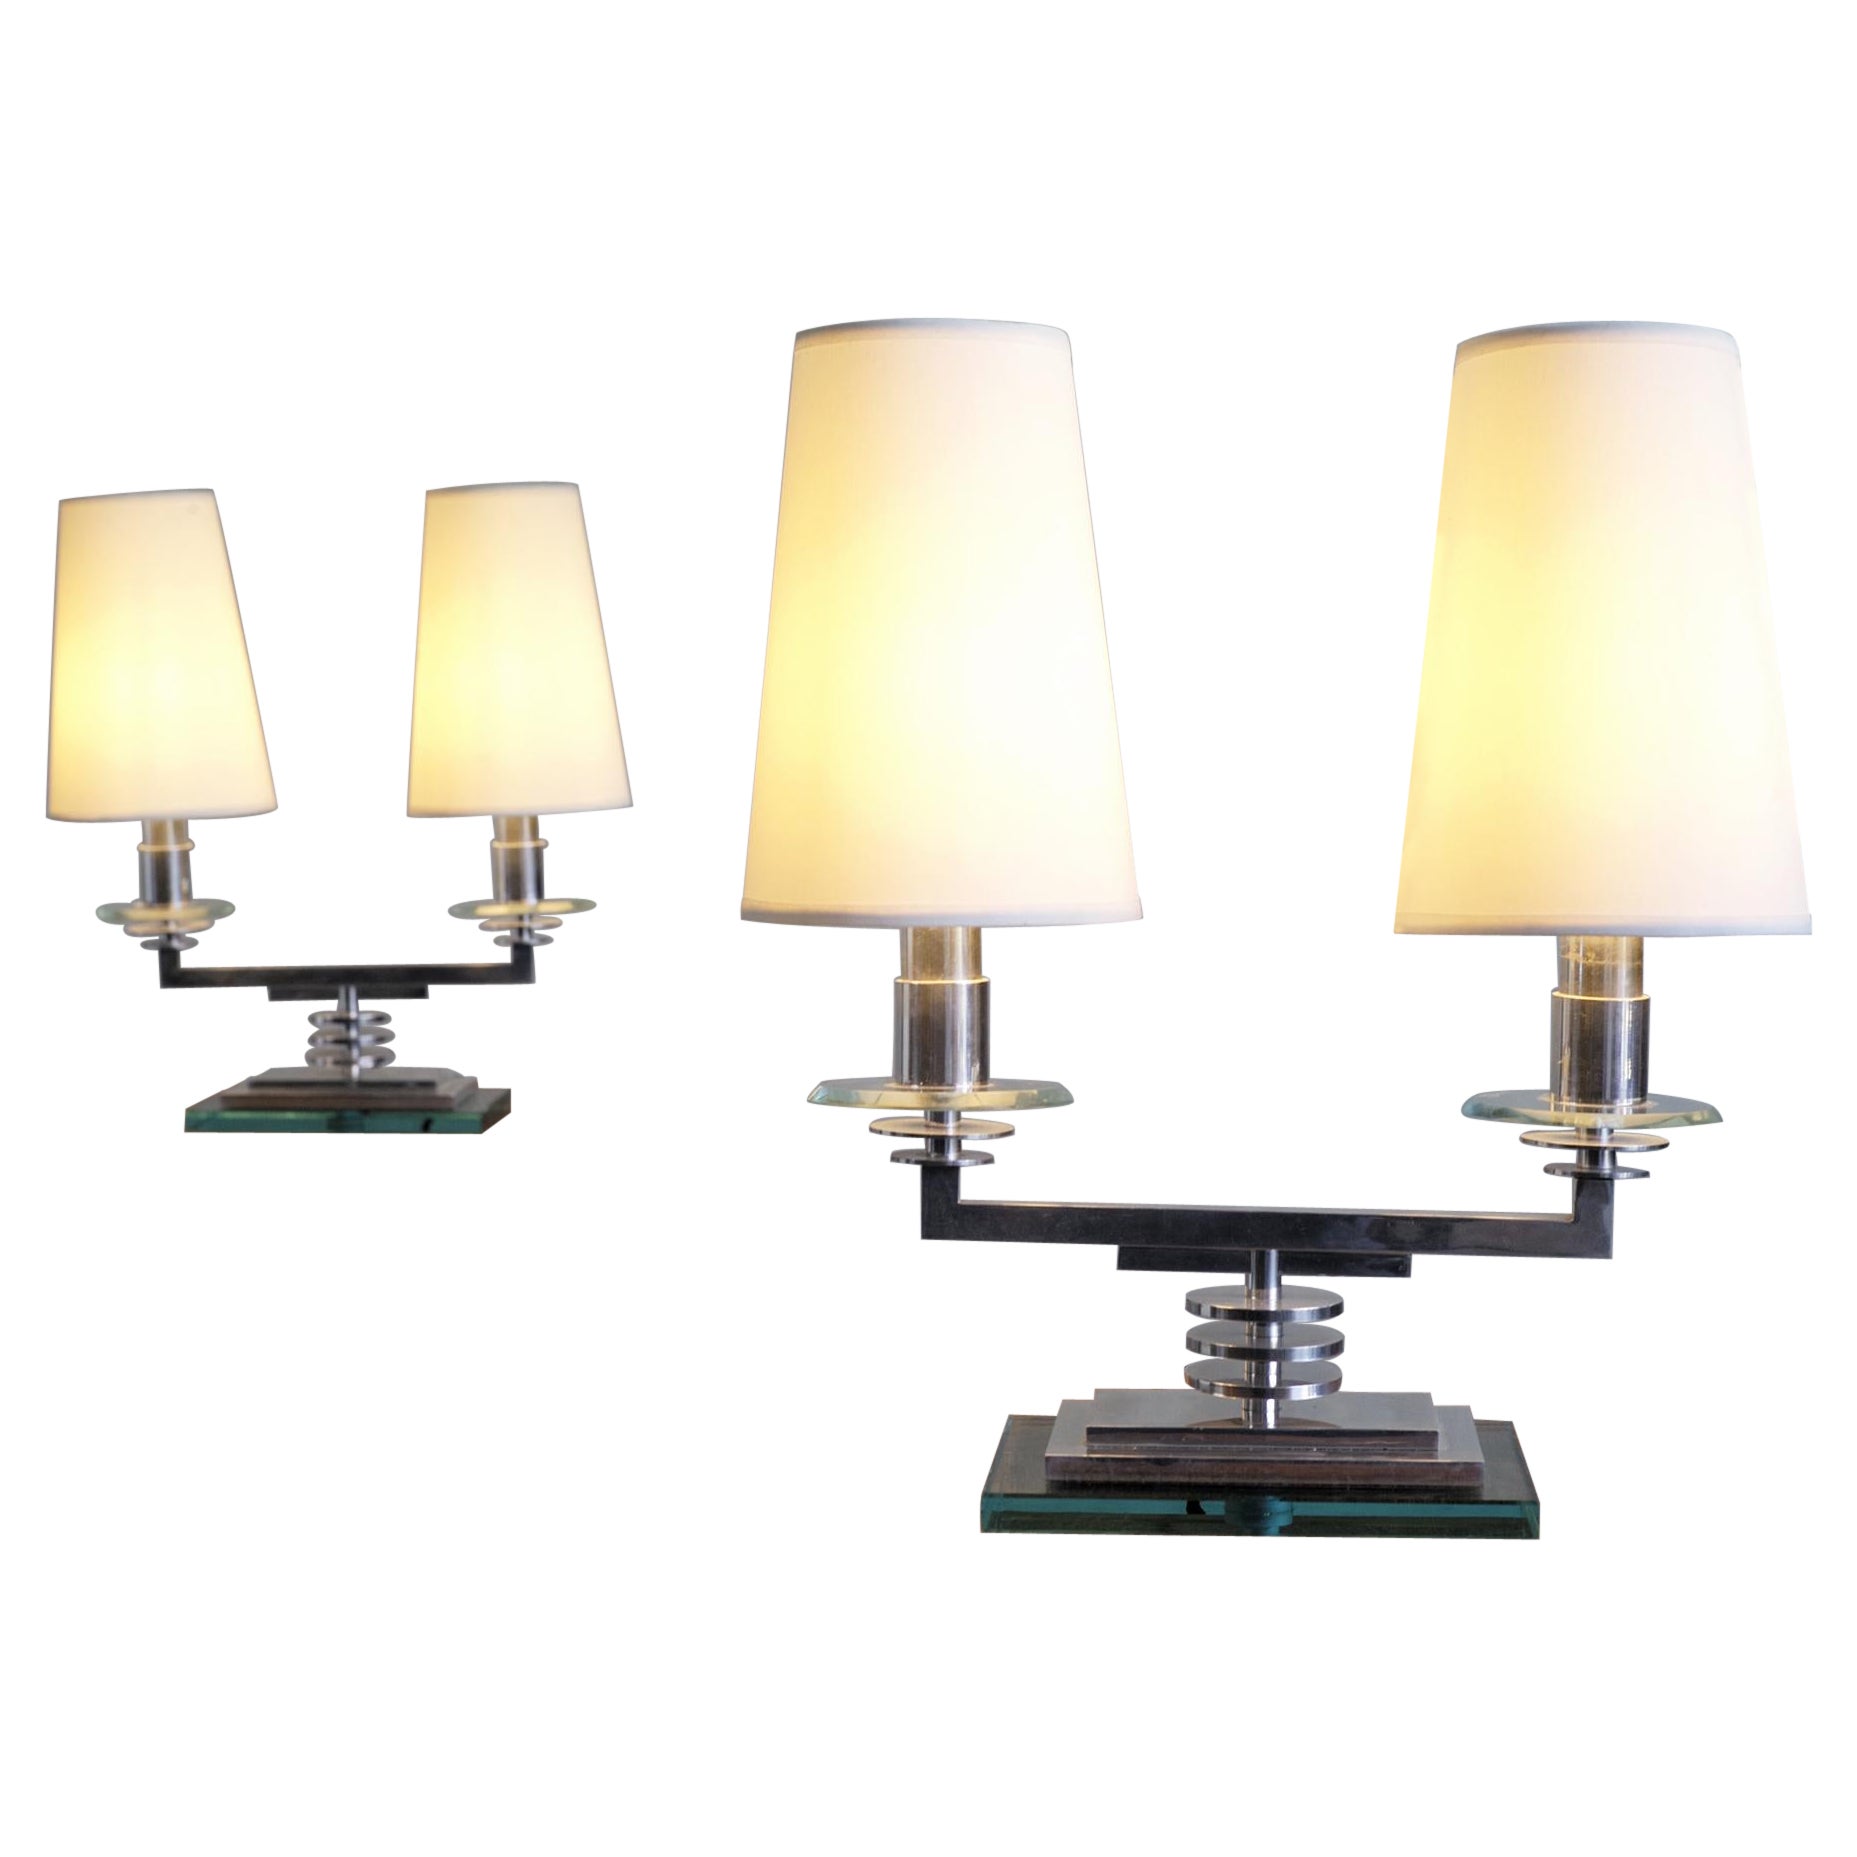 Pair of Modernist Chandelier Lamps For Sale